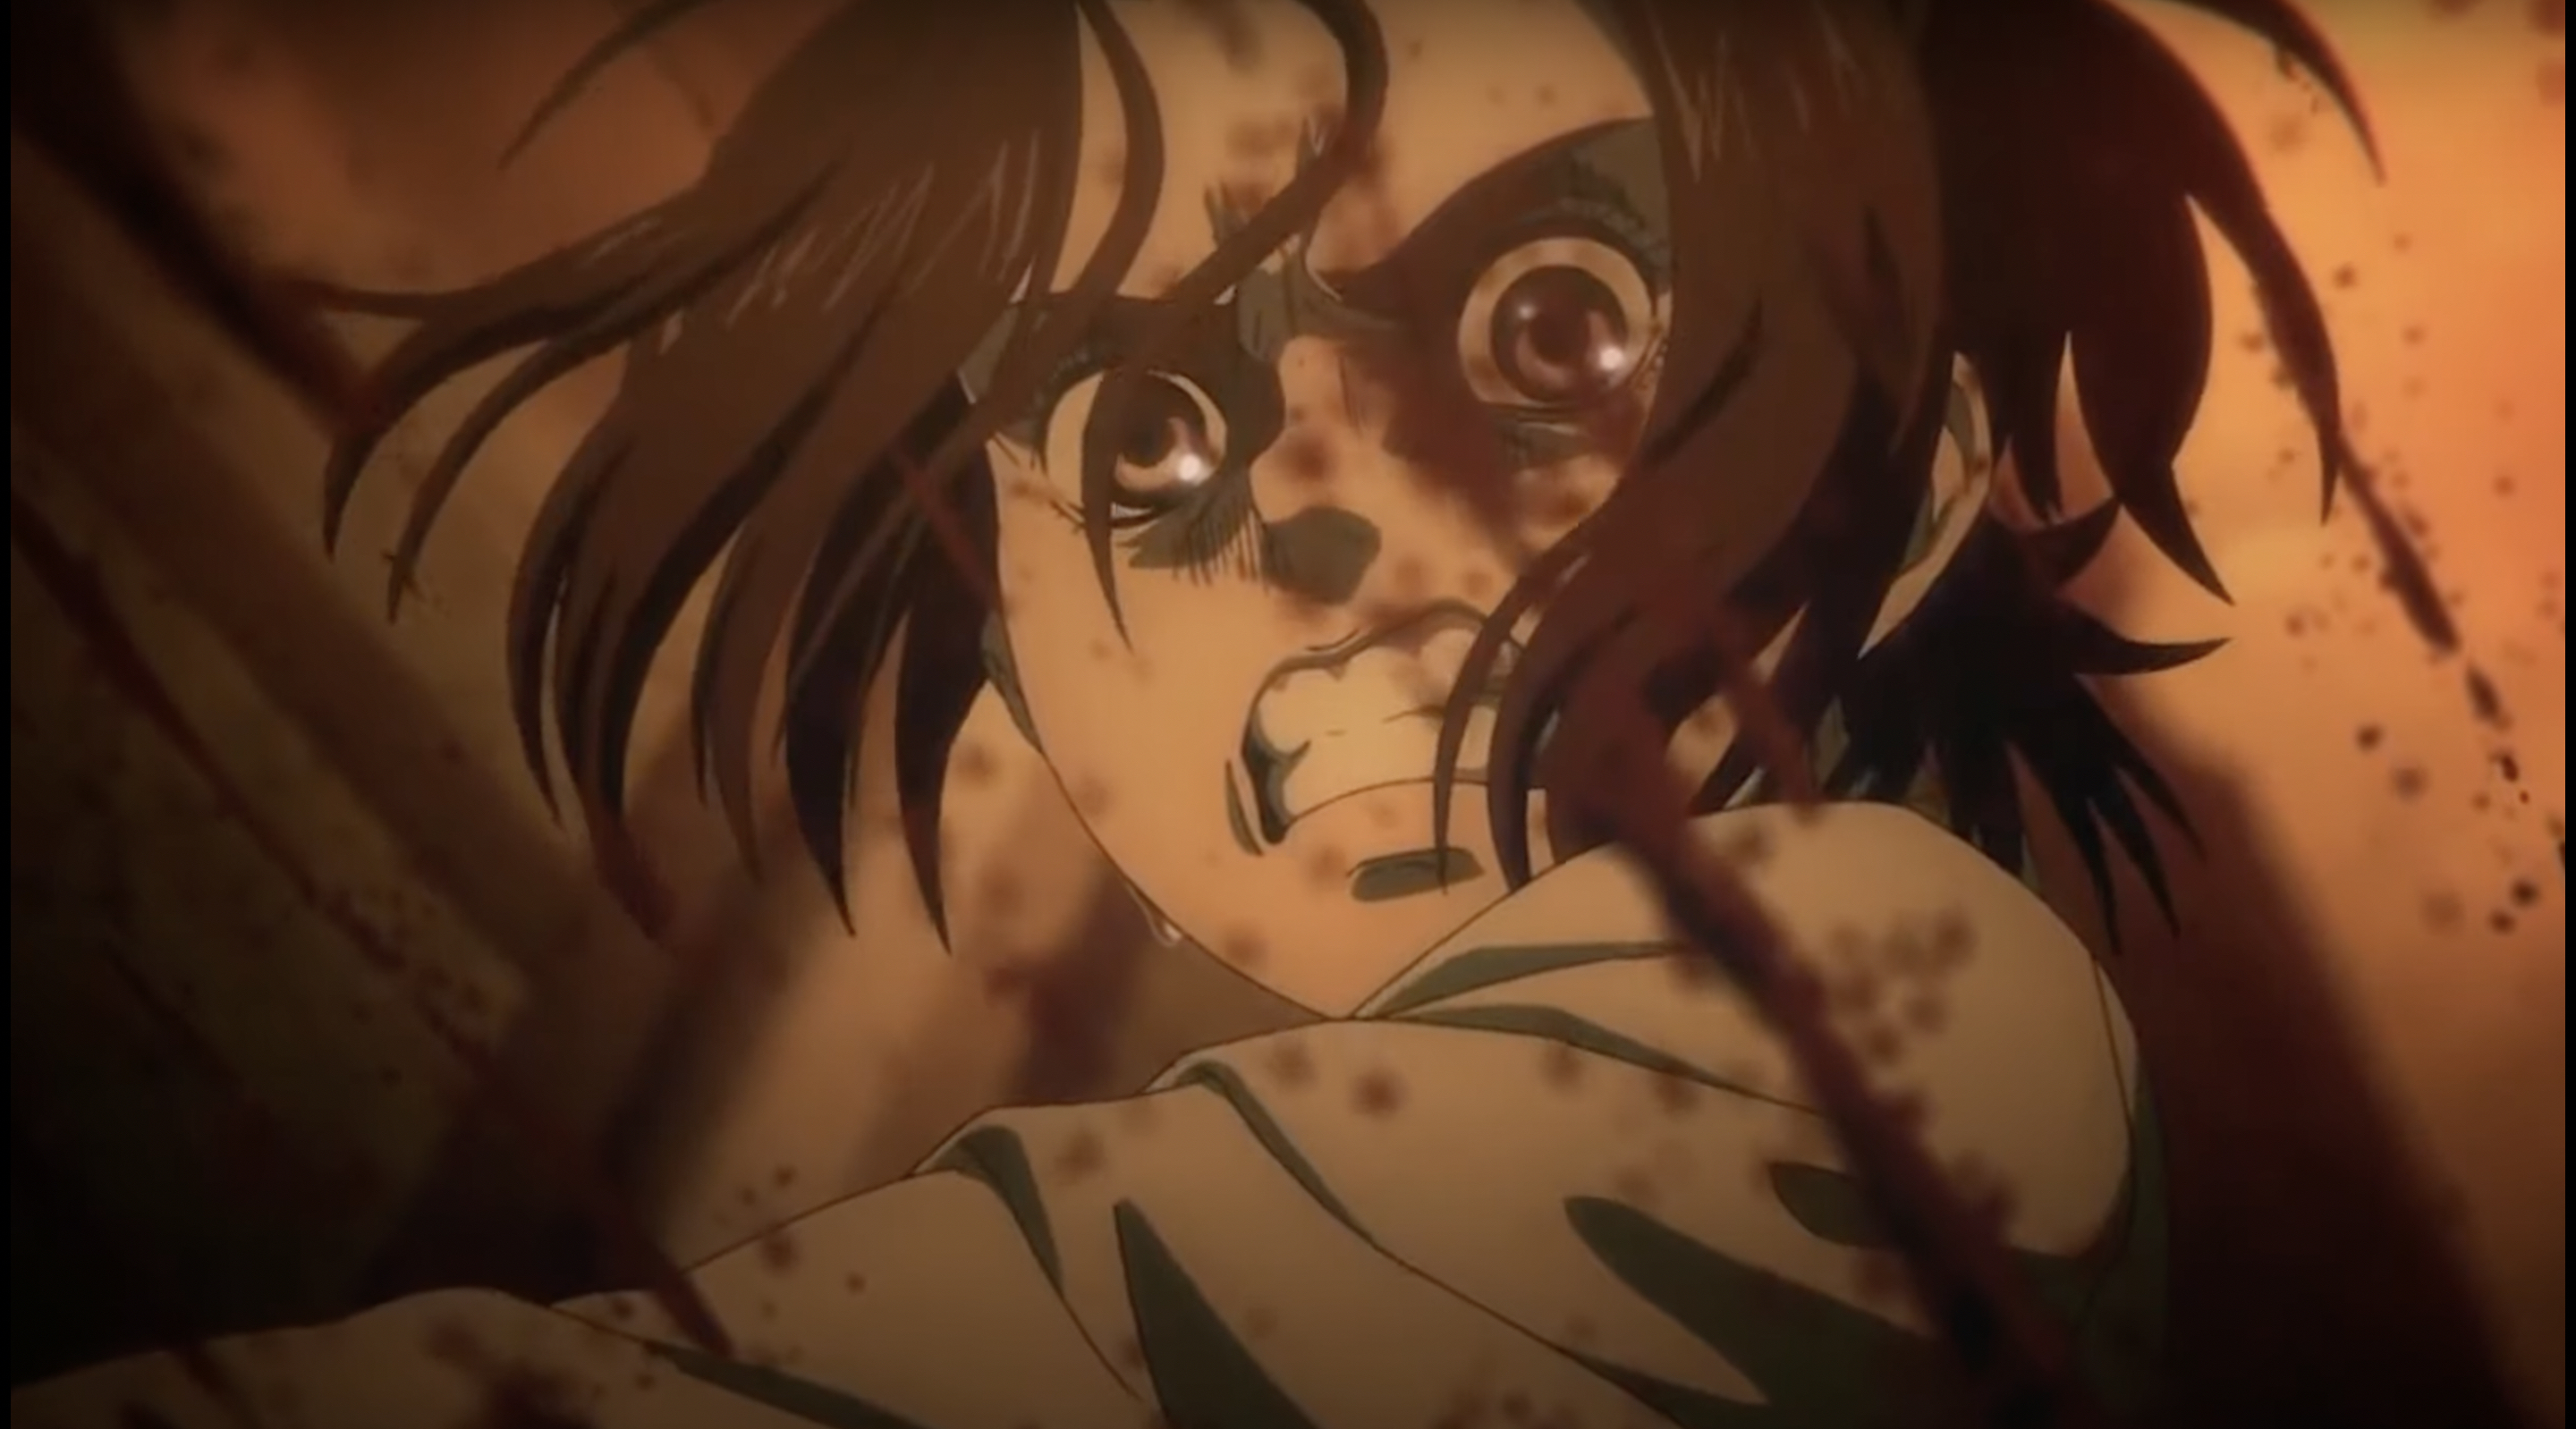 Attack on Titan manga approaches its conclusion - World Comic Book Review